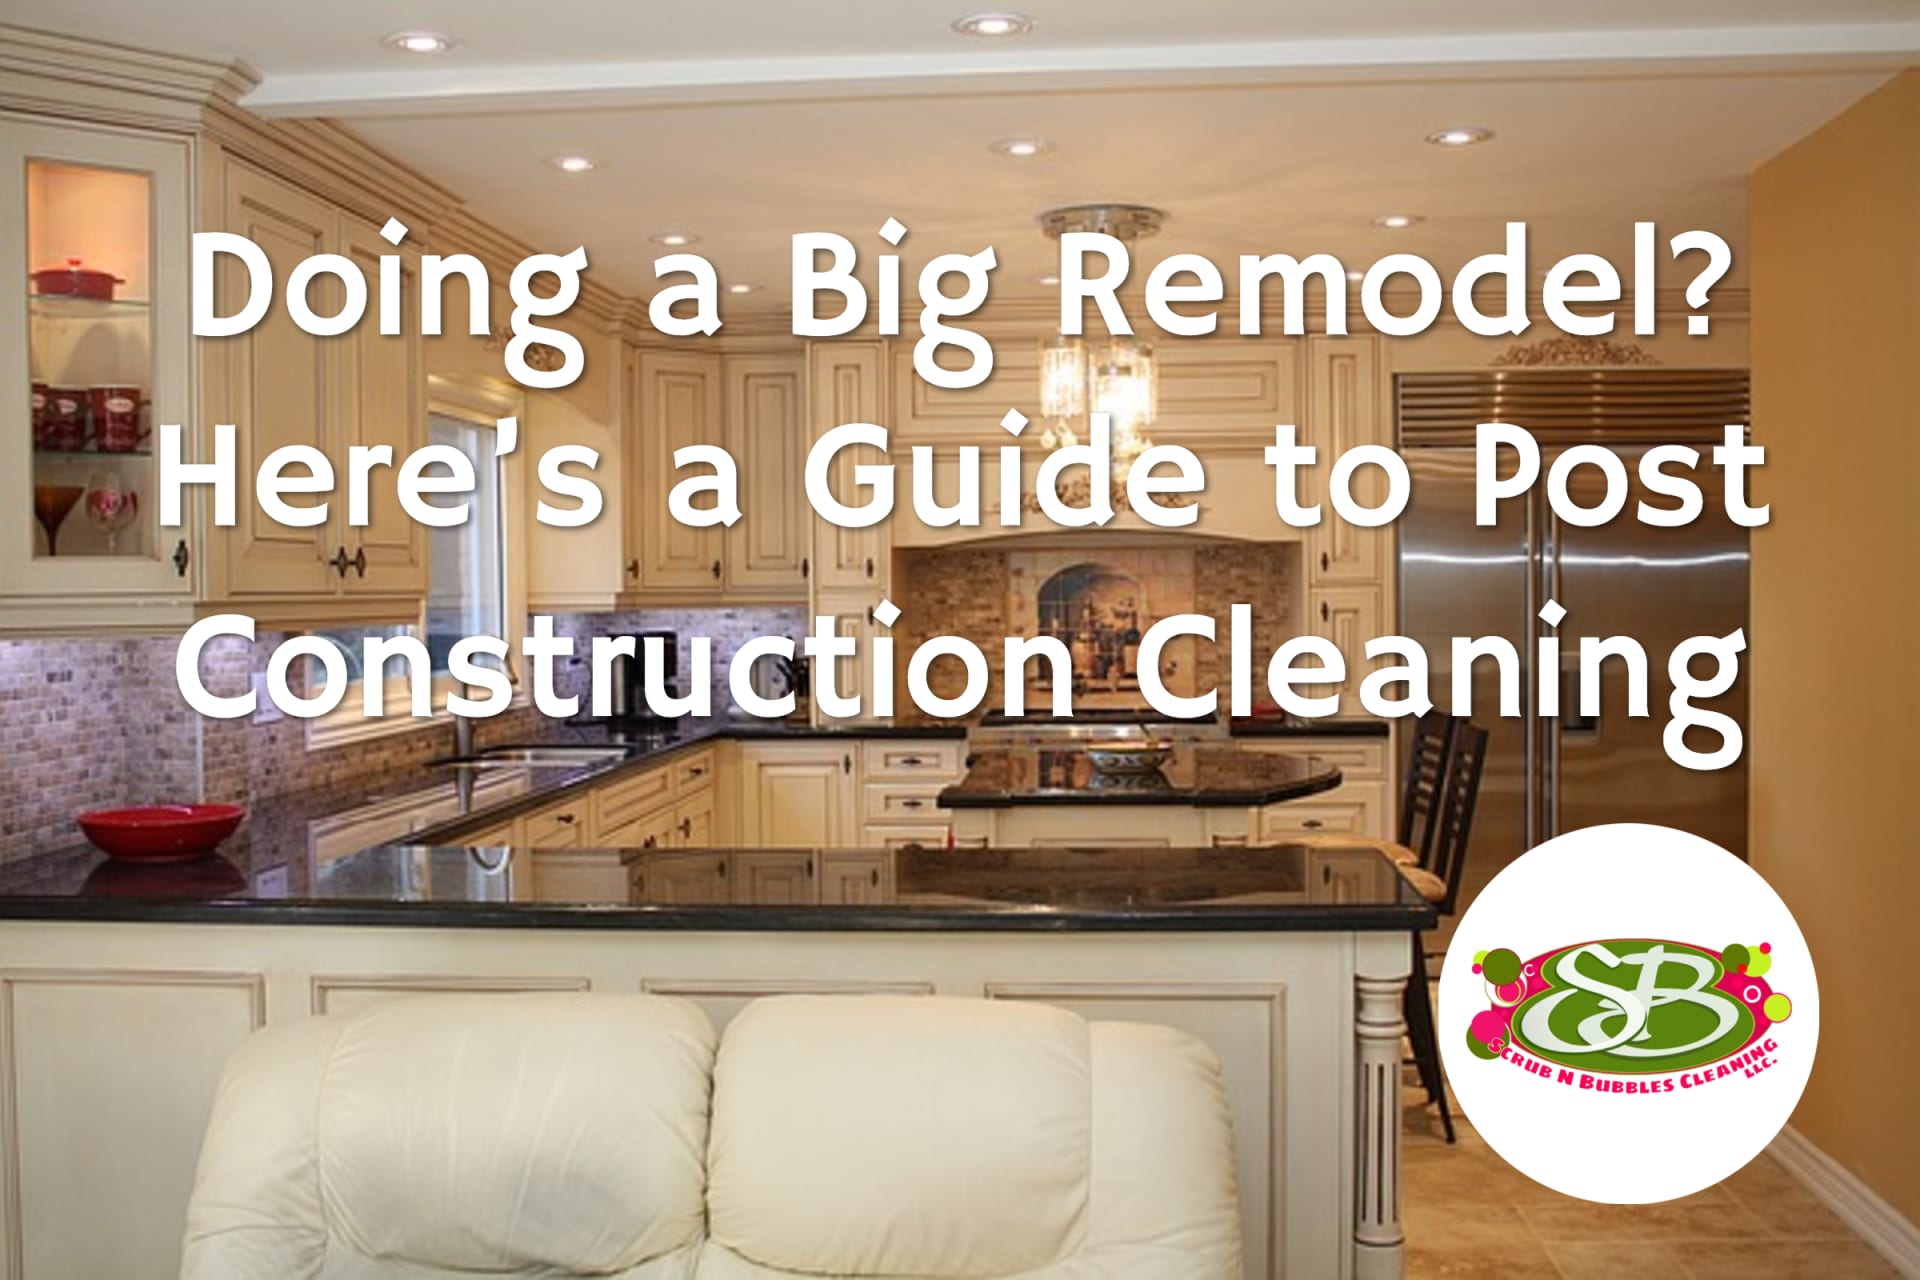 Guide to Post Construction Cleaning